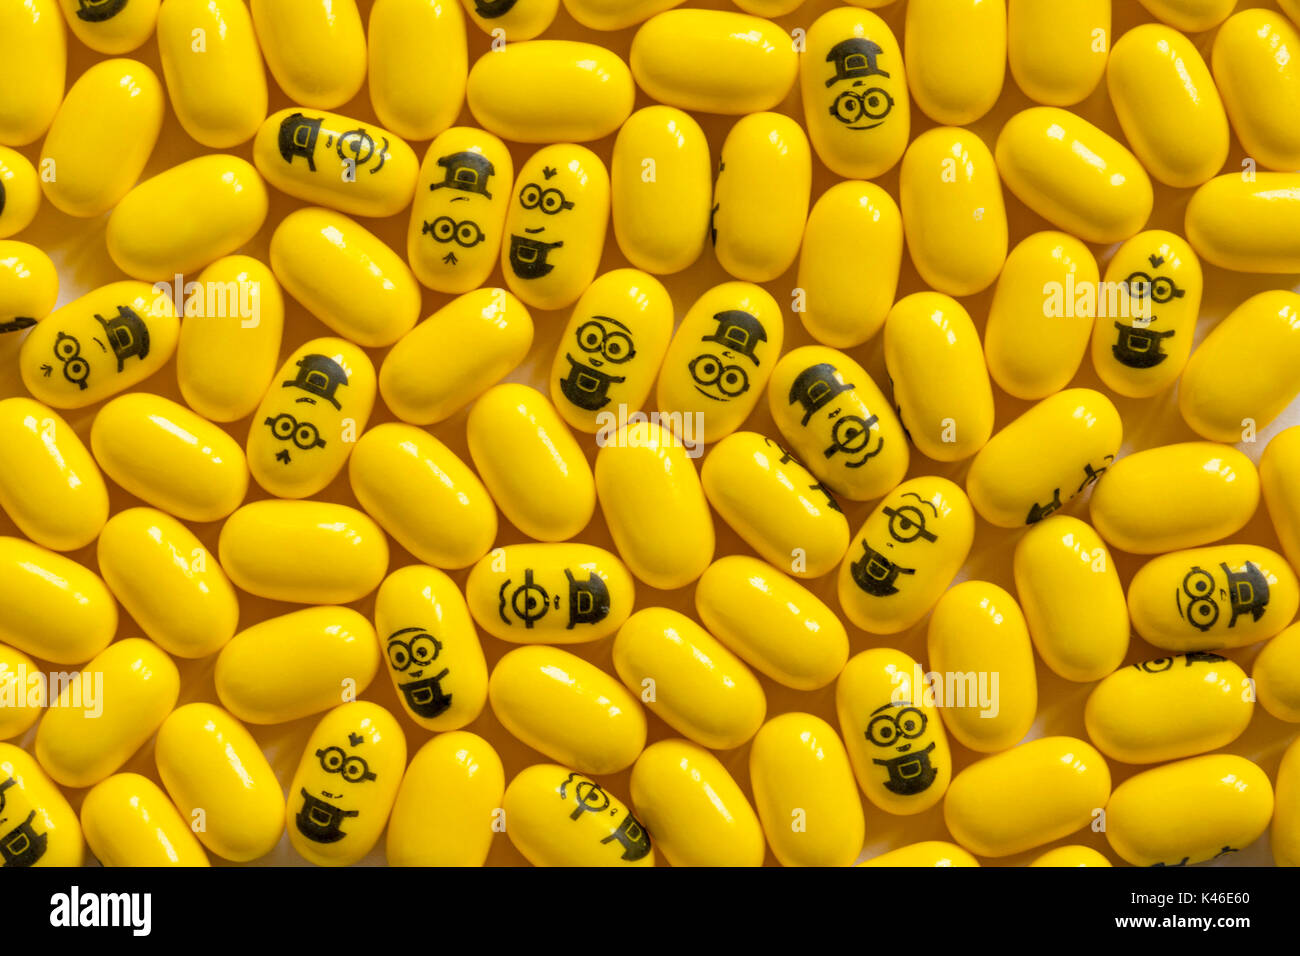 minions banana tic tac special edition - spread out Stock Photo